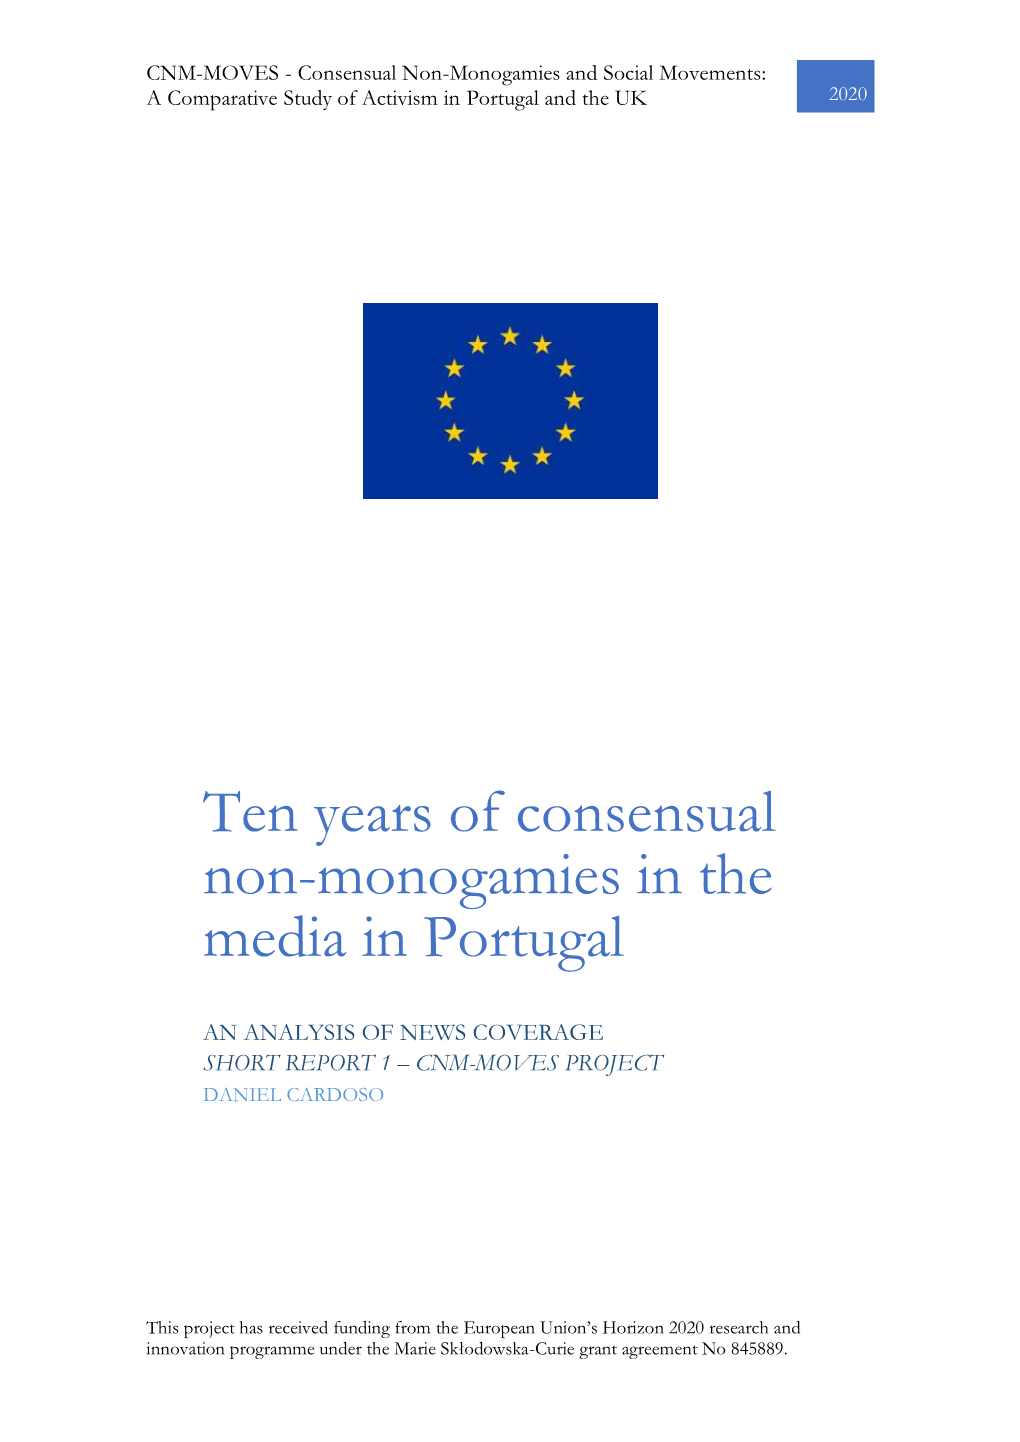 Ten Years of Consensual Non-Monogamies in the Media in Portugal